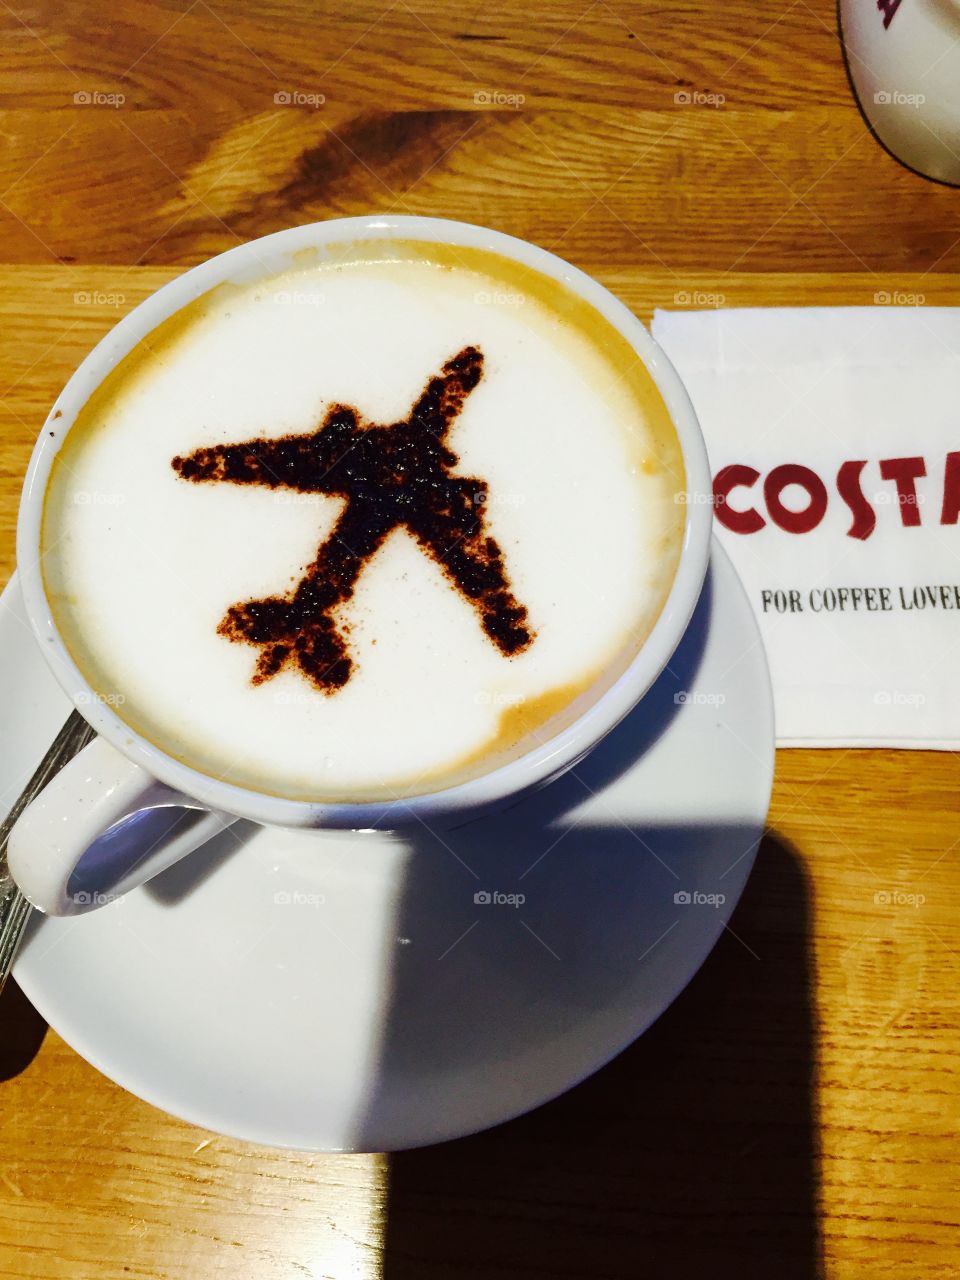 Coffe before flying 